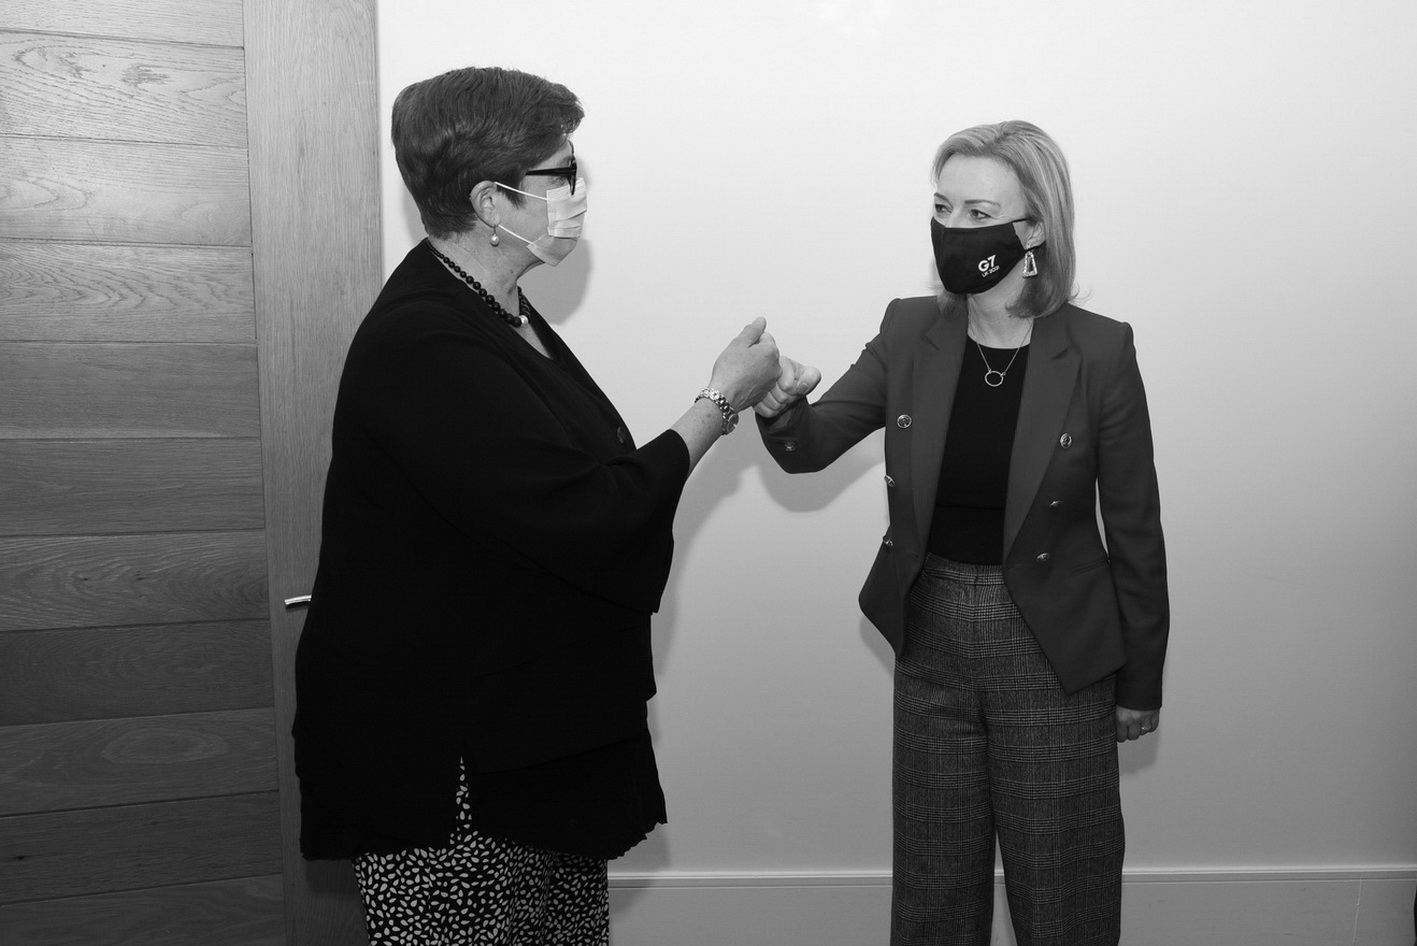 Liz Truss, UK Foreign Secretary and Marise Payne the Australian Minister for Foreign Affairs